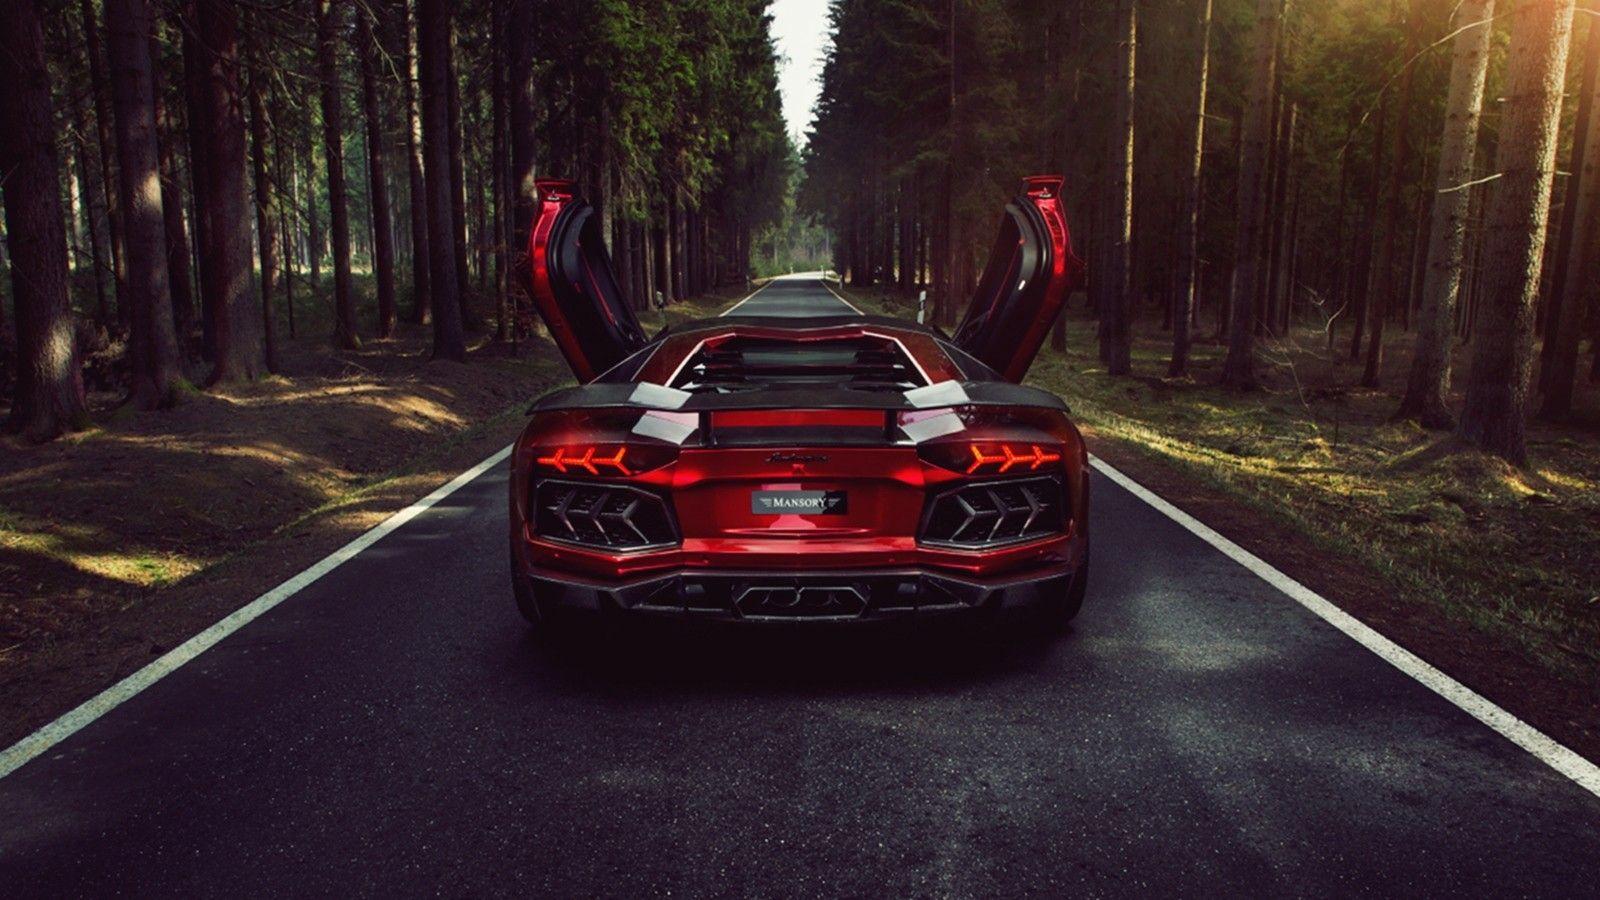 Exotic Cars HD Wallpapers - Top Free Exotic Cars HD ...